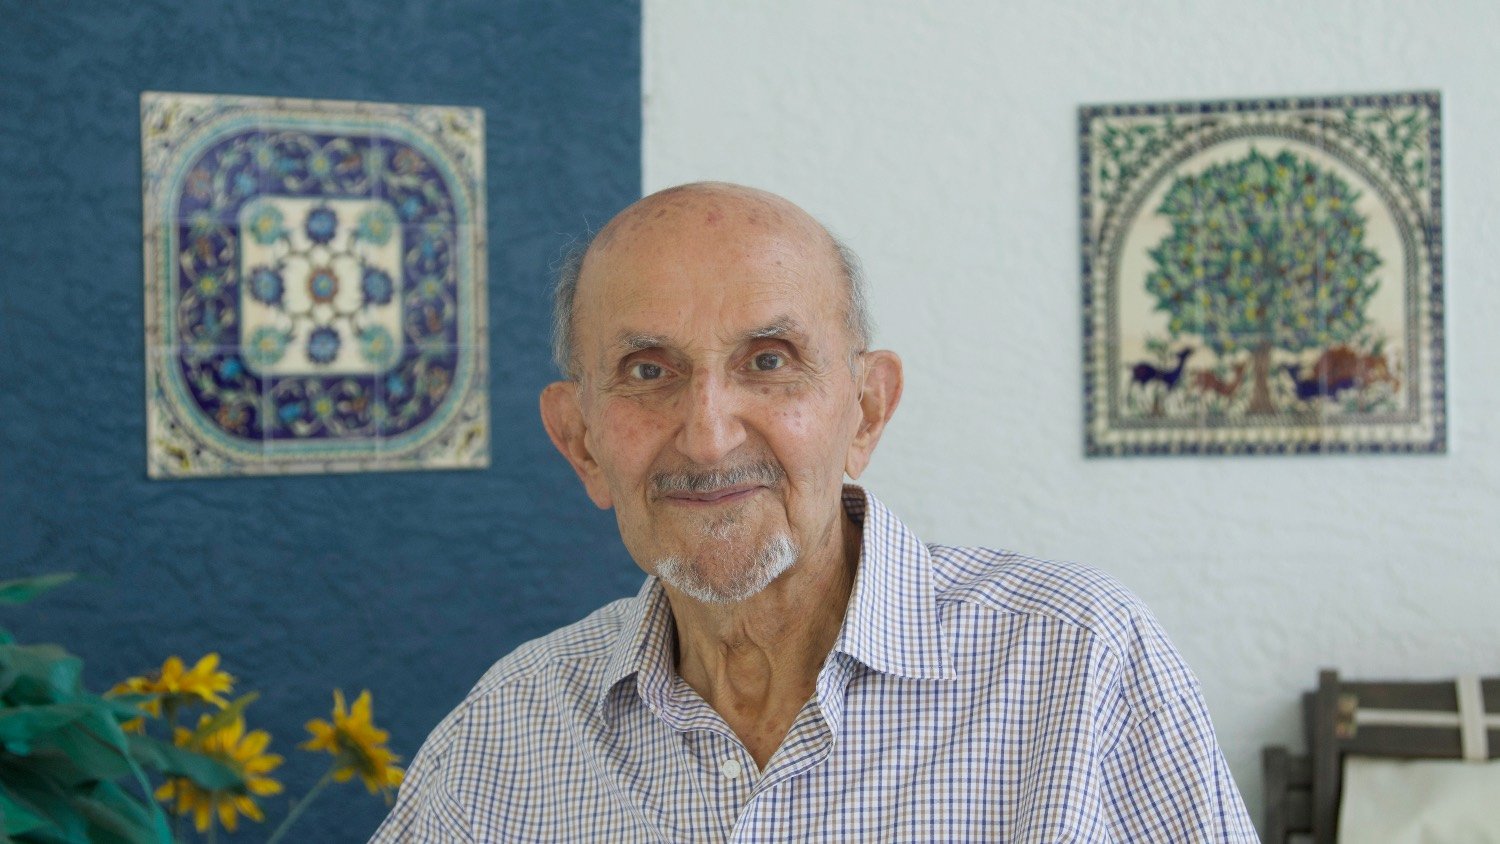 Hassan Hammami stands in front of a set of two tile art pieces he bought from Palestine.